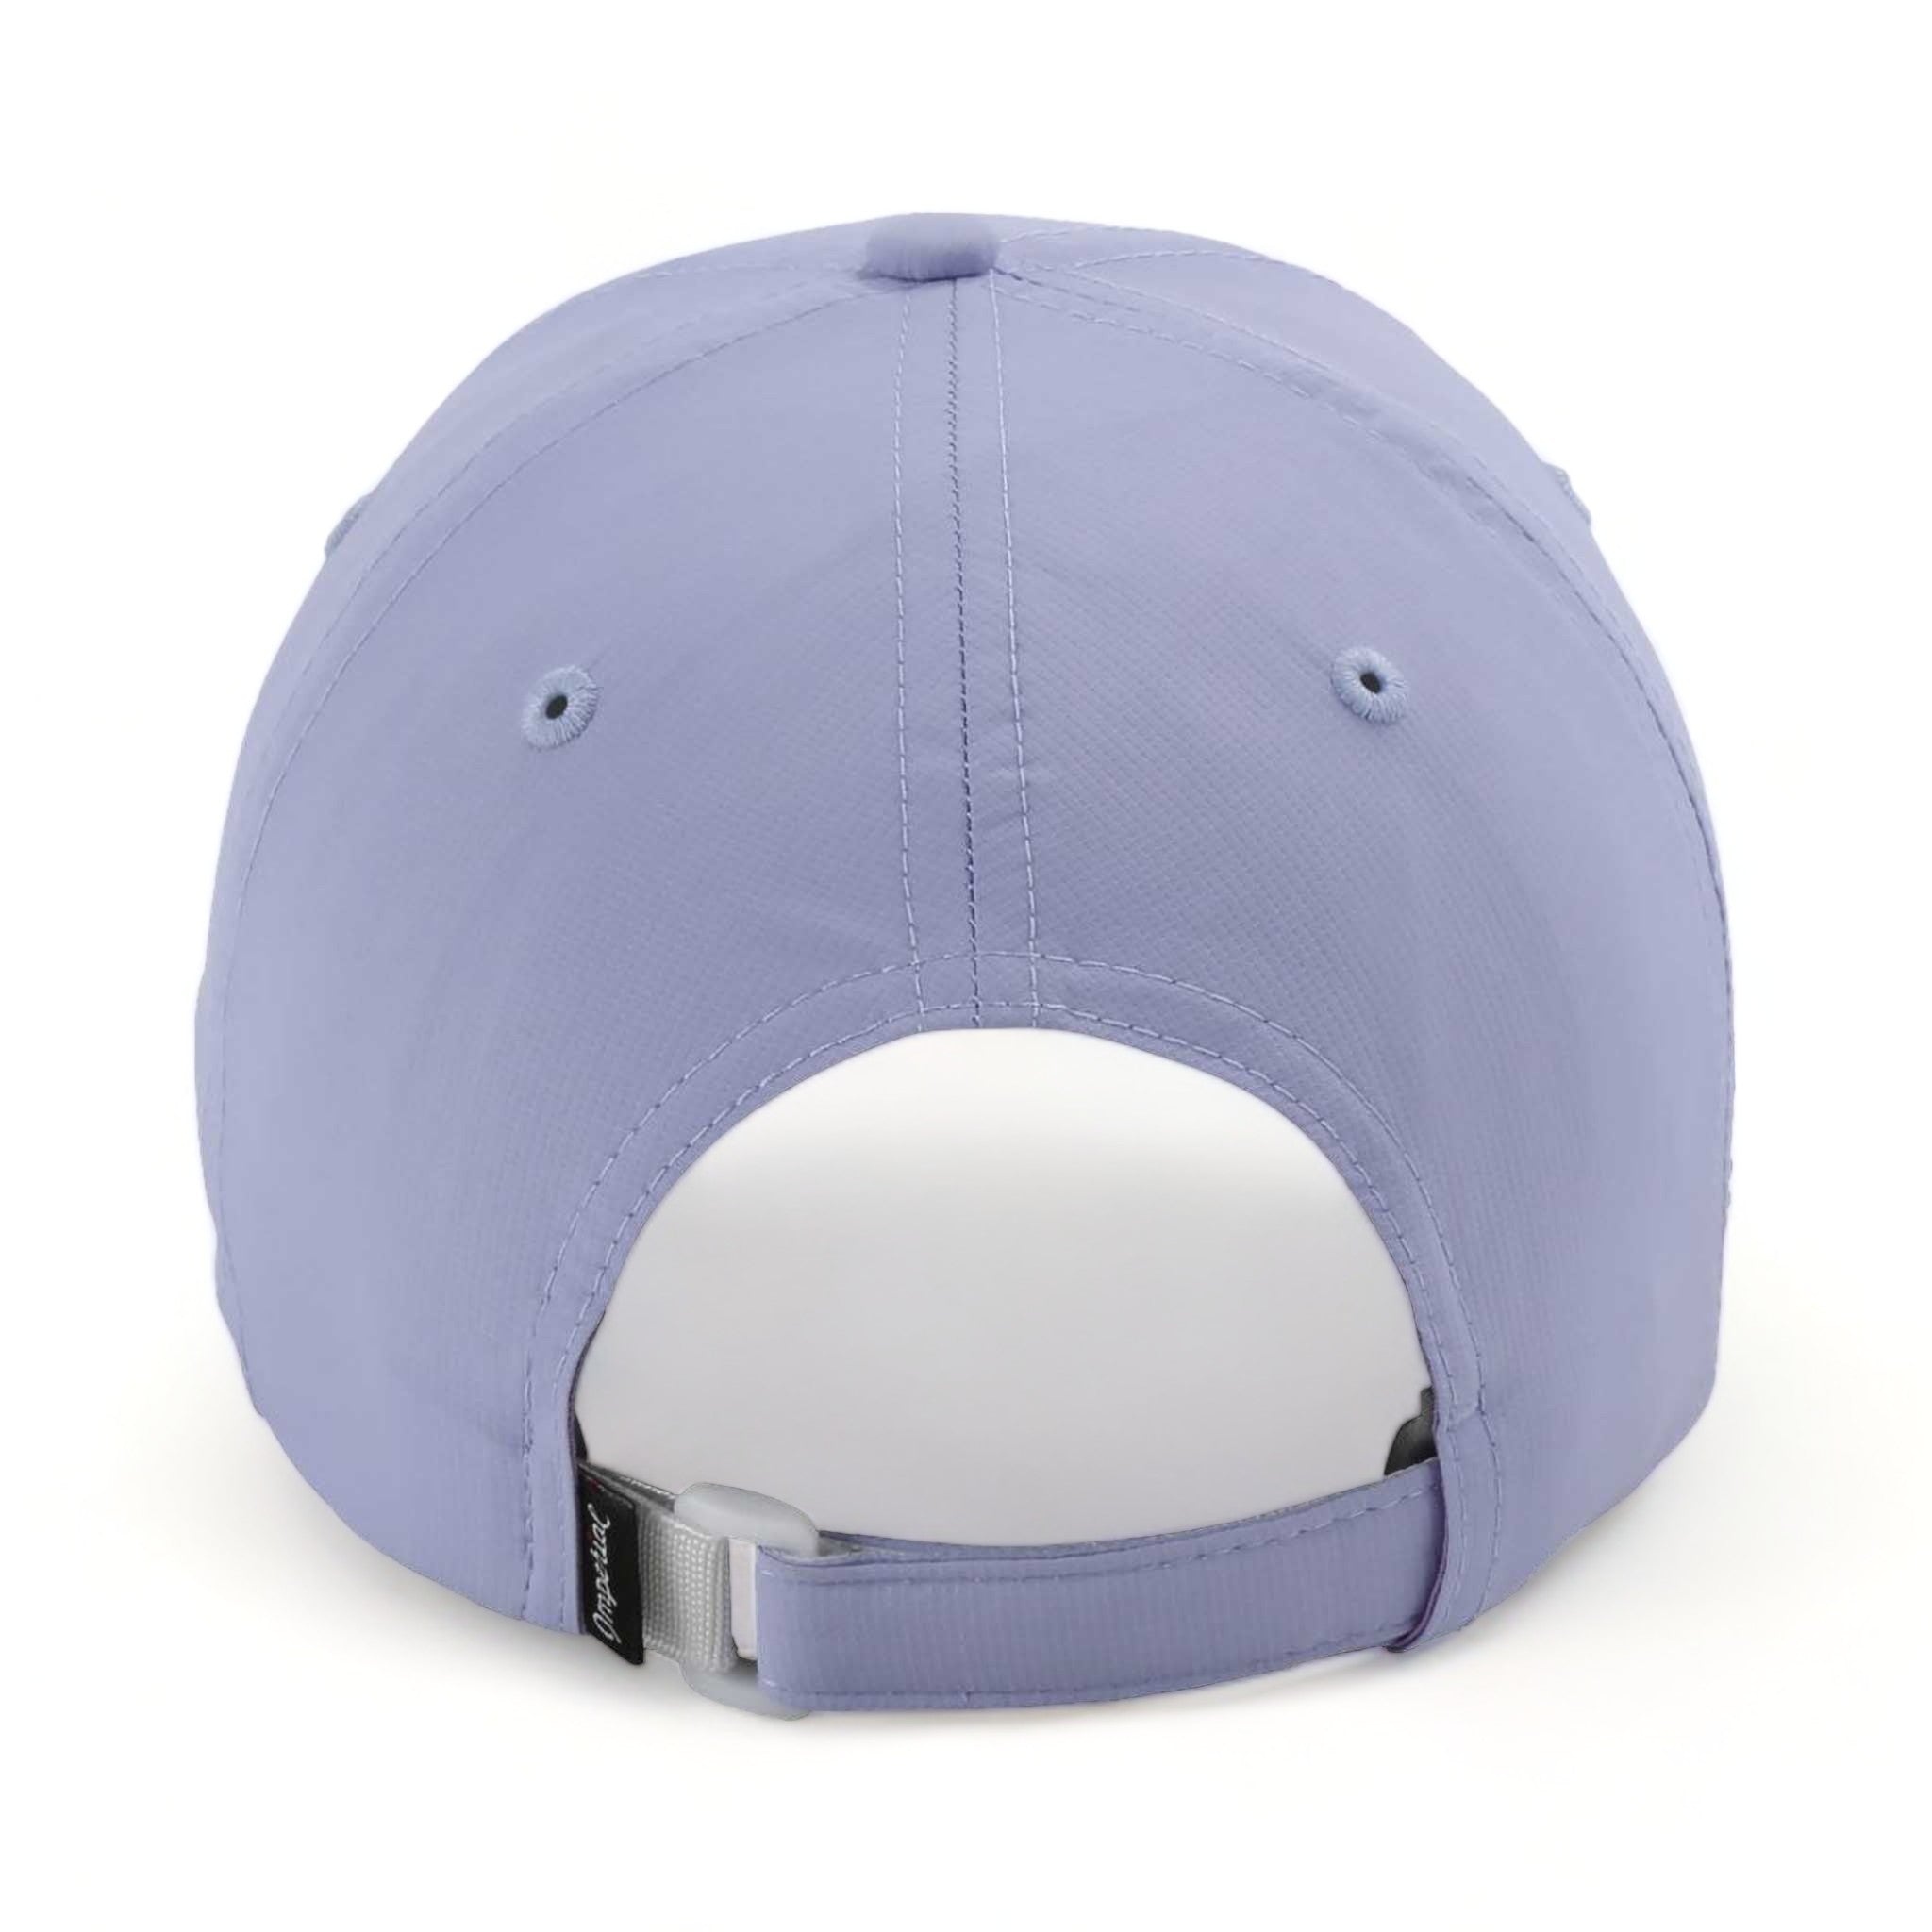 Back view of Imperial X210P custom hat in lavender